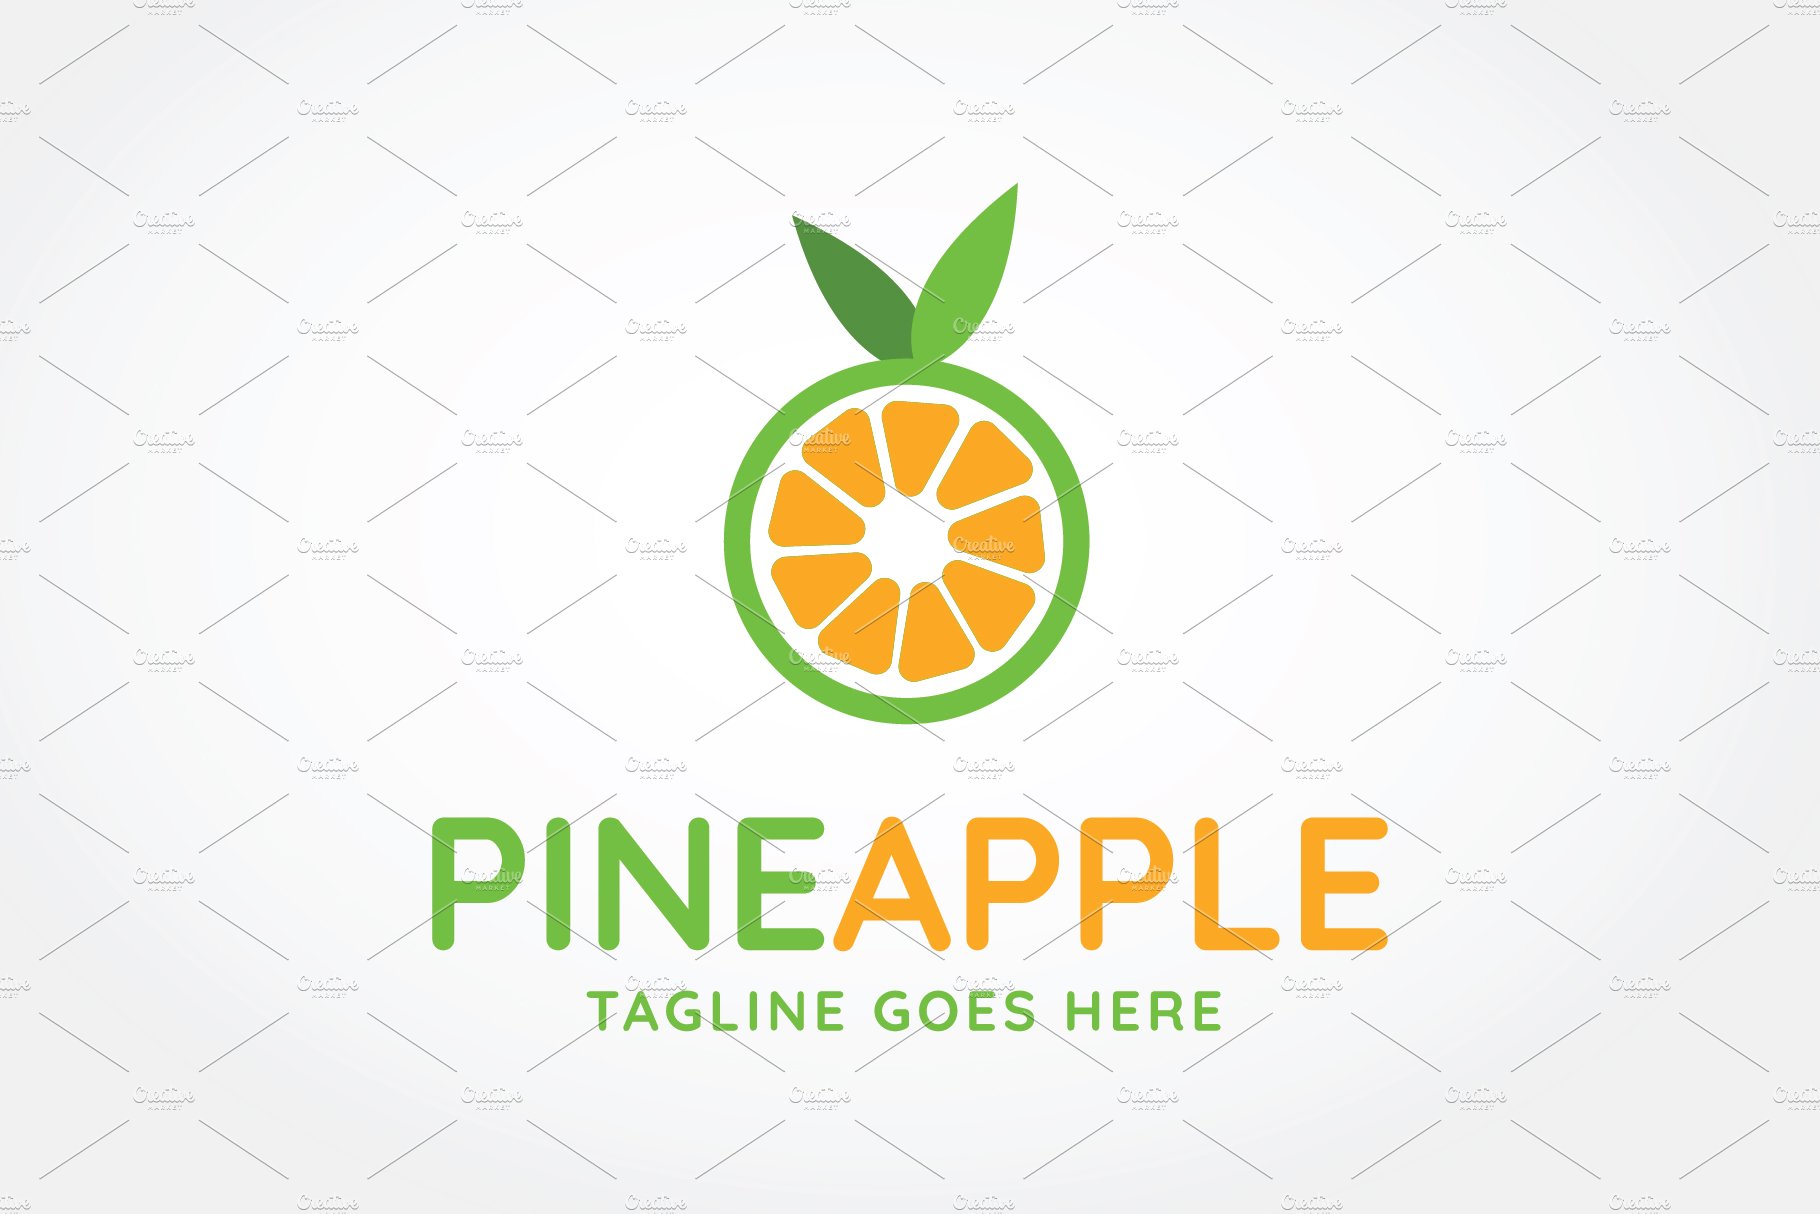 PineApple - Juice Logo Template cover image.